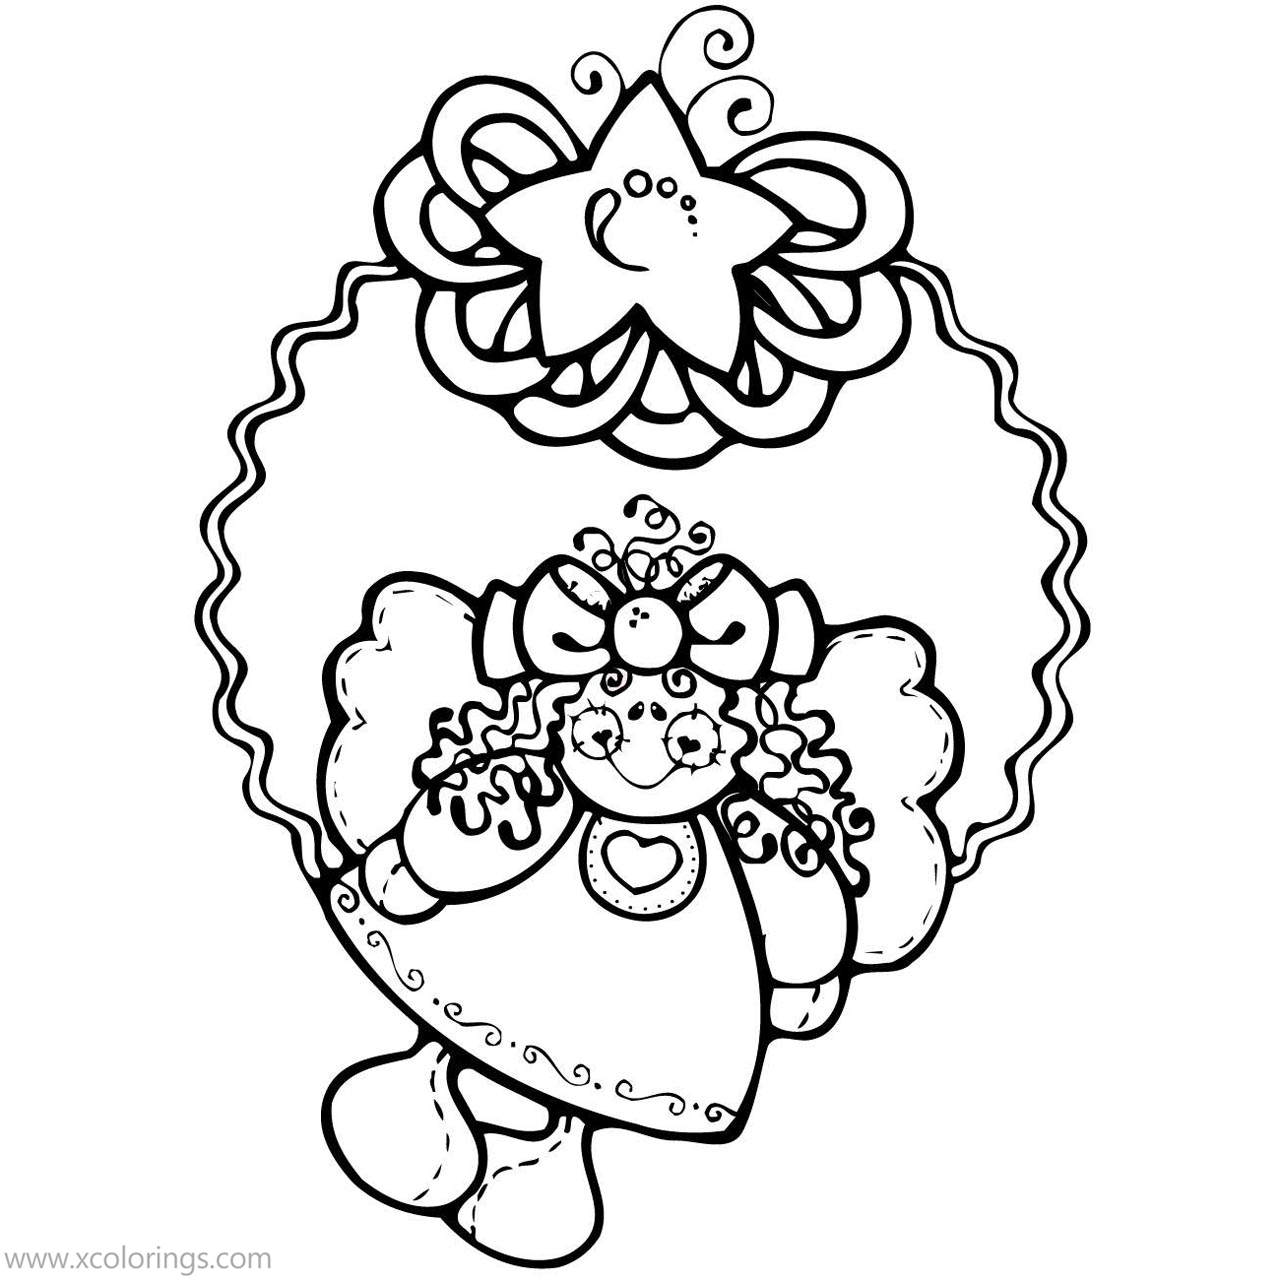 Free Angel Christmas Wreath Coloring Pages printable